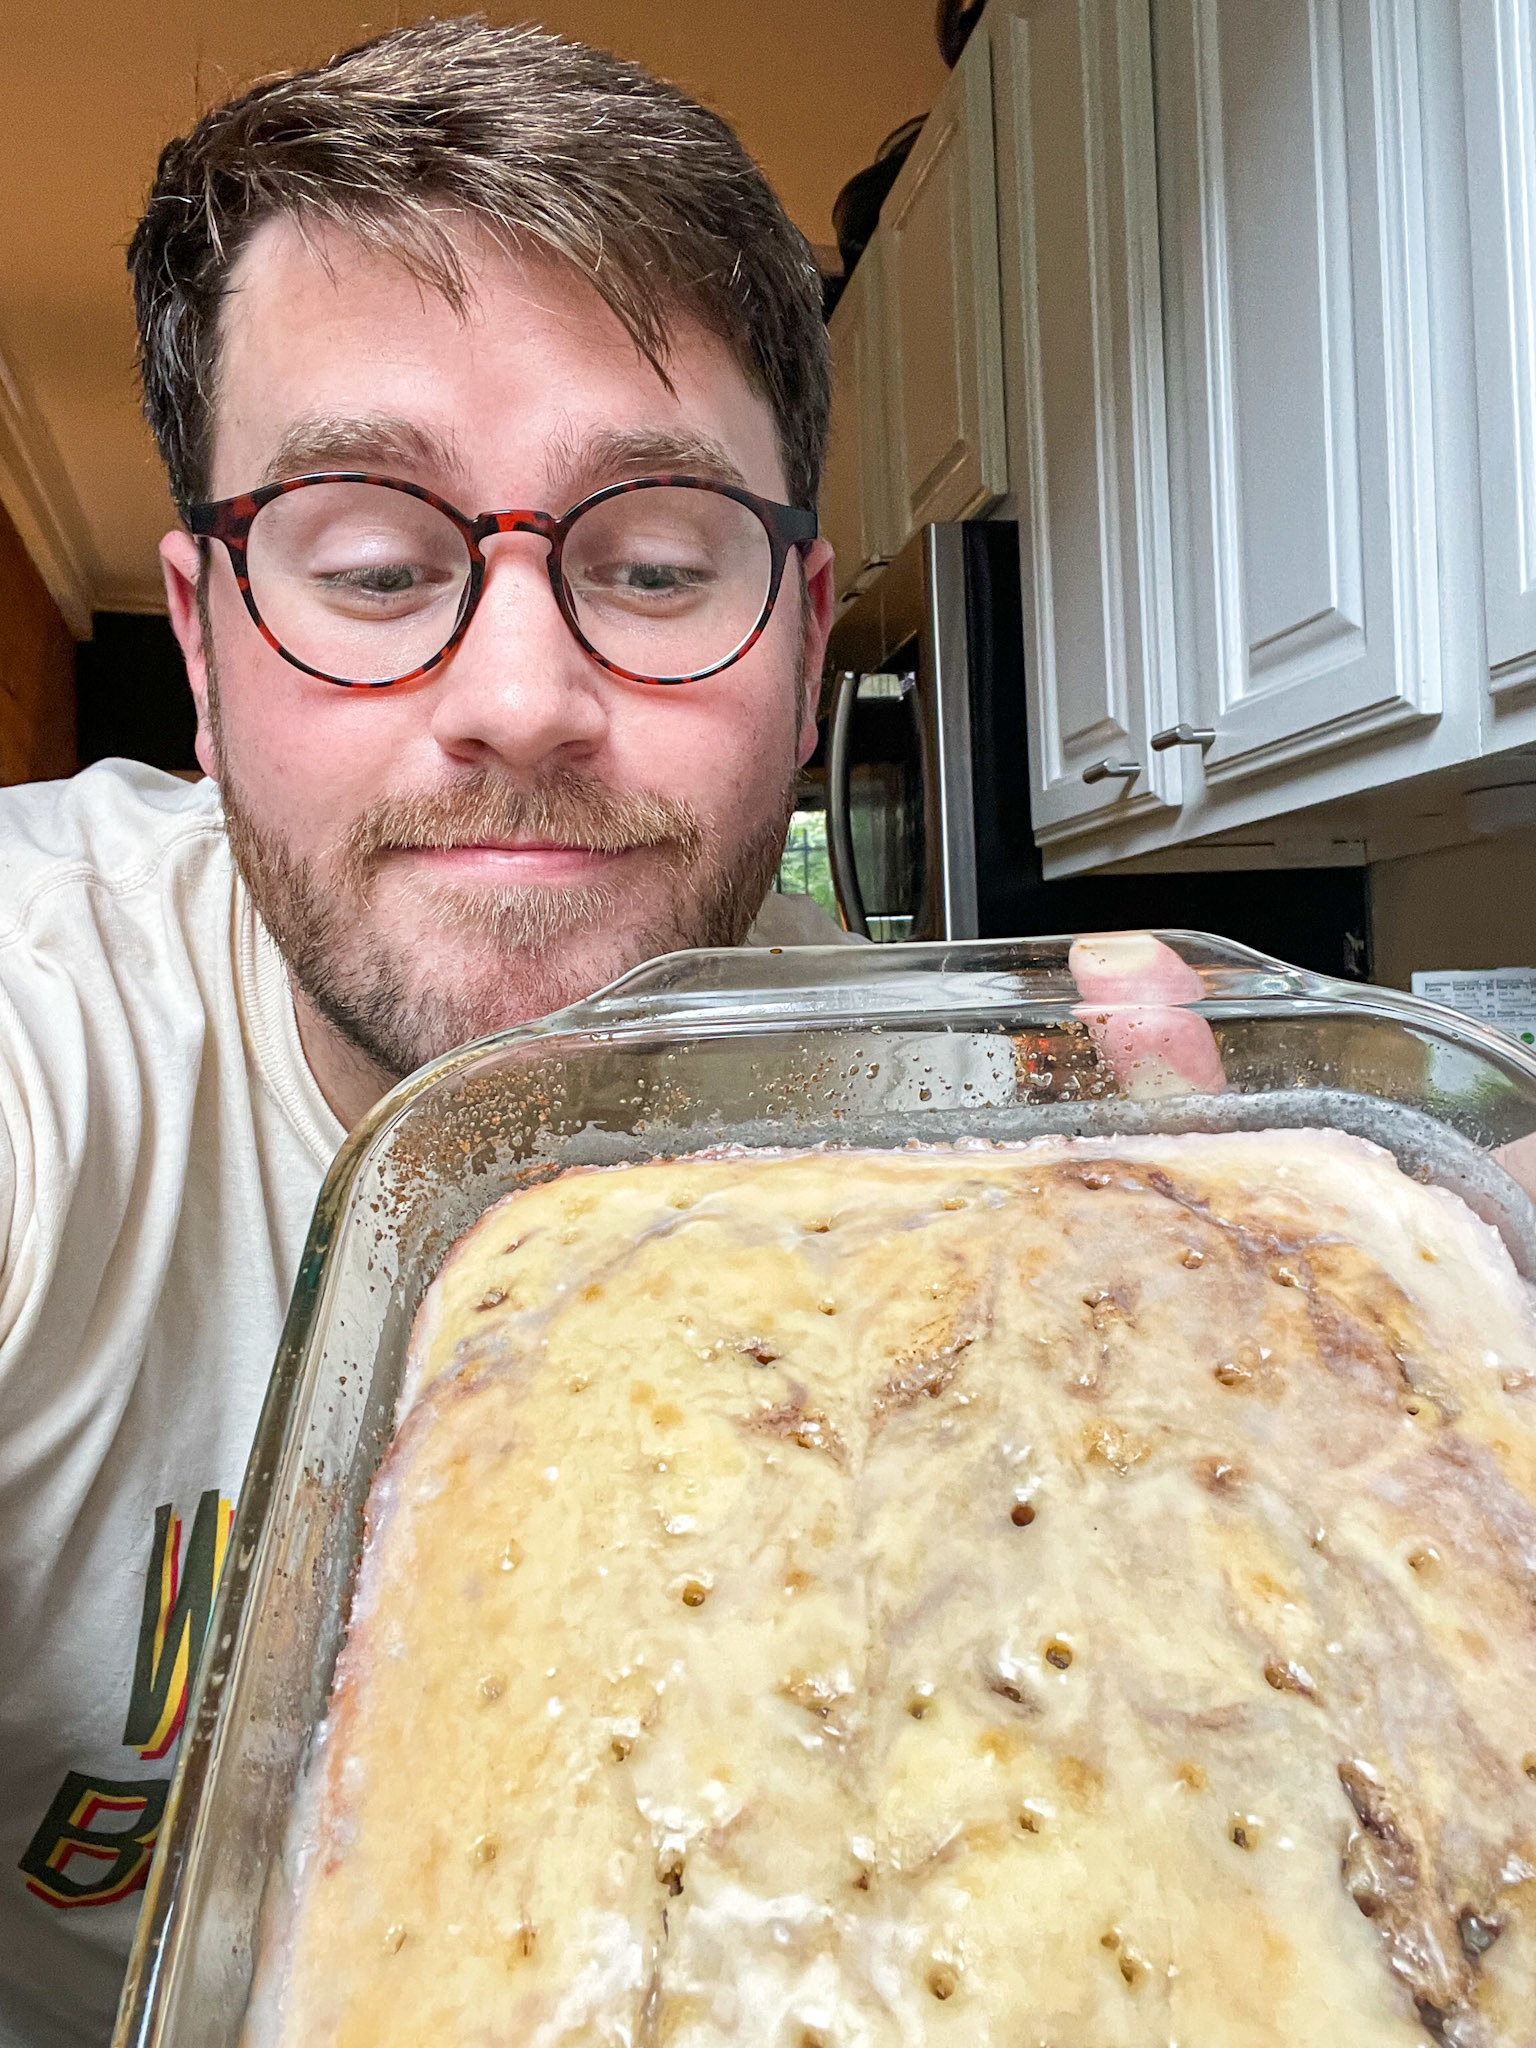 author holding up the baked cake and looking down at it